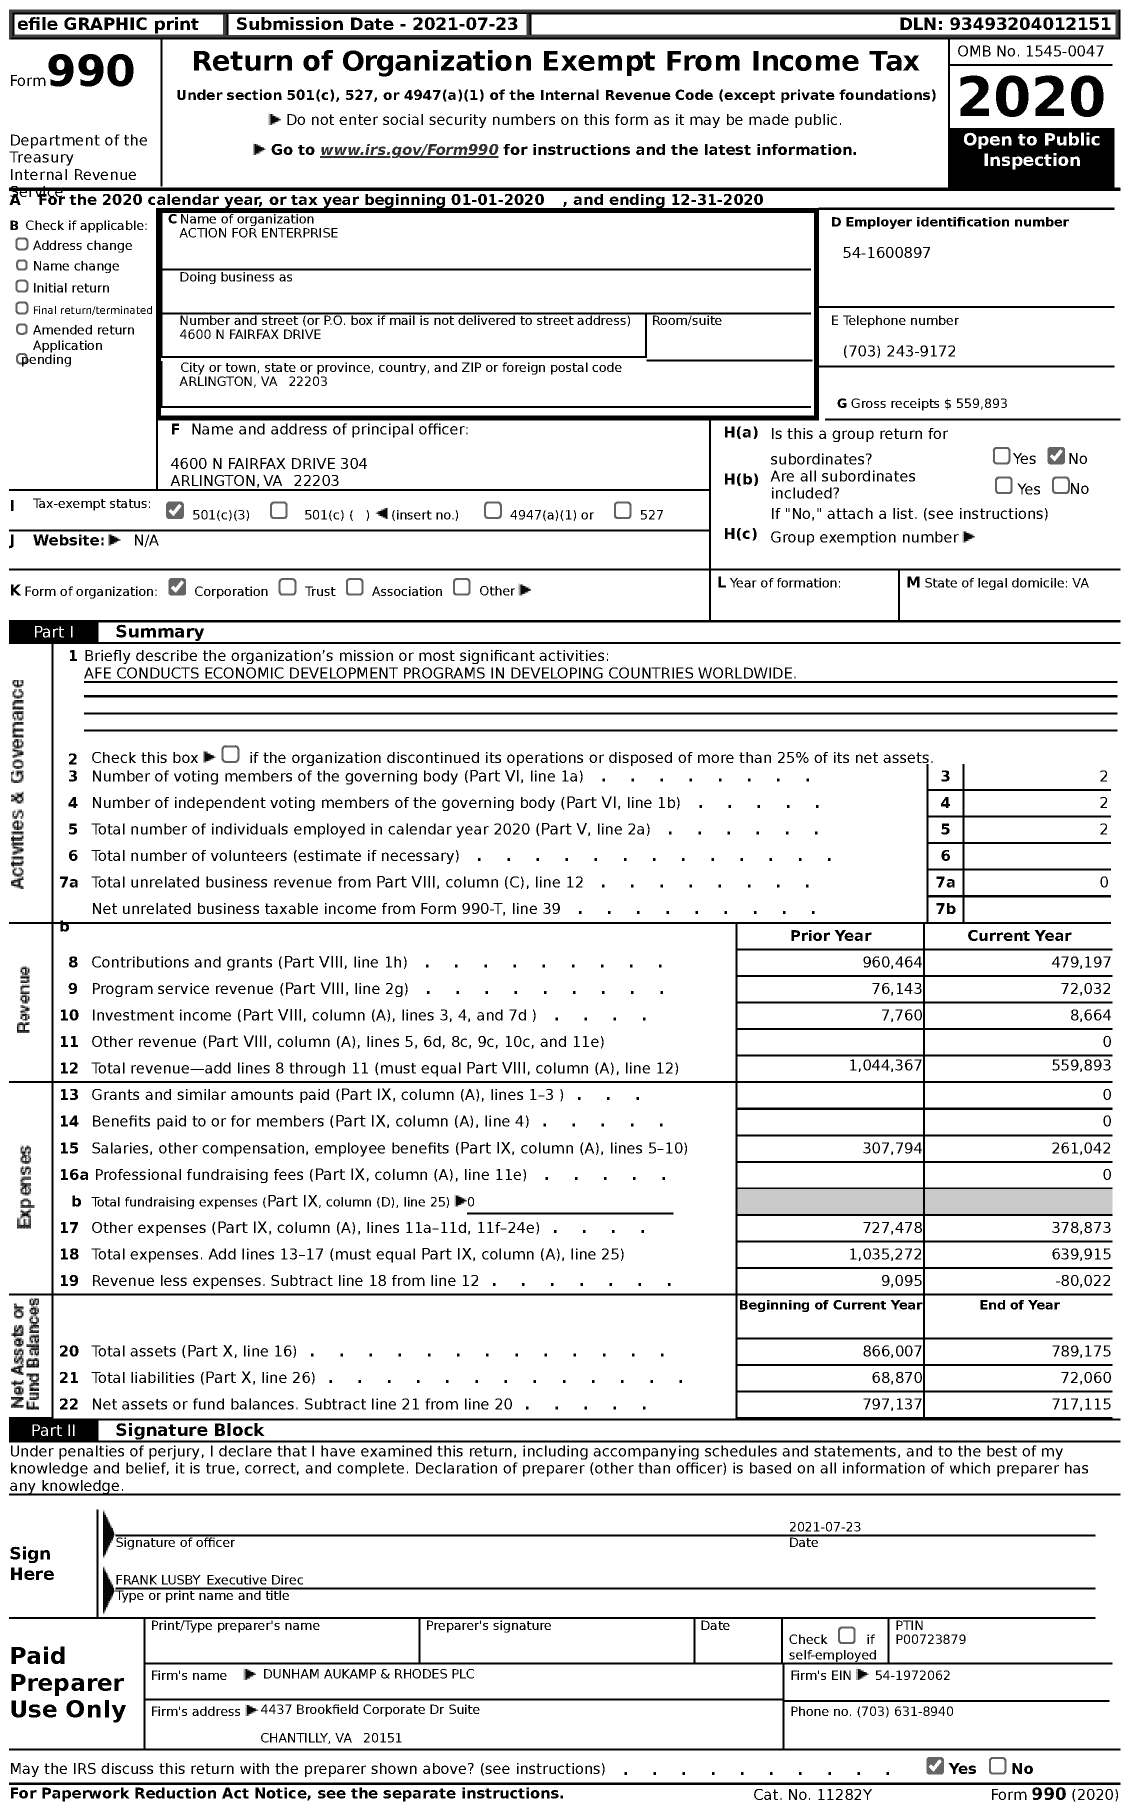 Image of first page of 2020 Form 990 for Action for Enterprise (AFE)